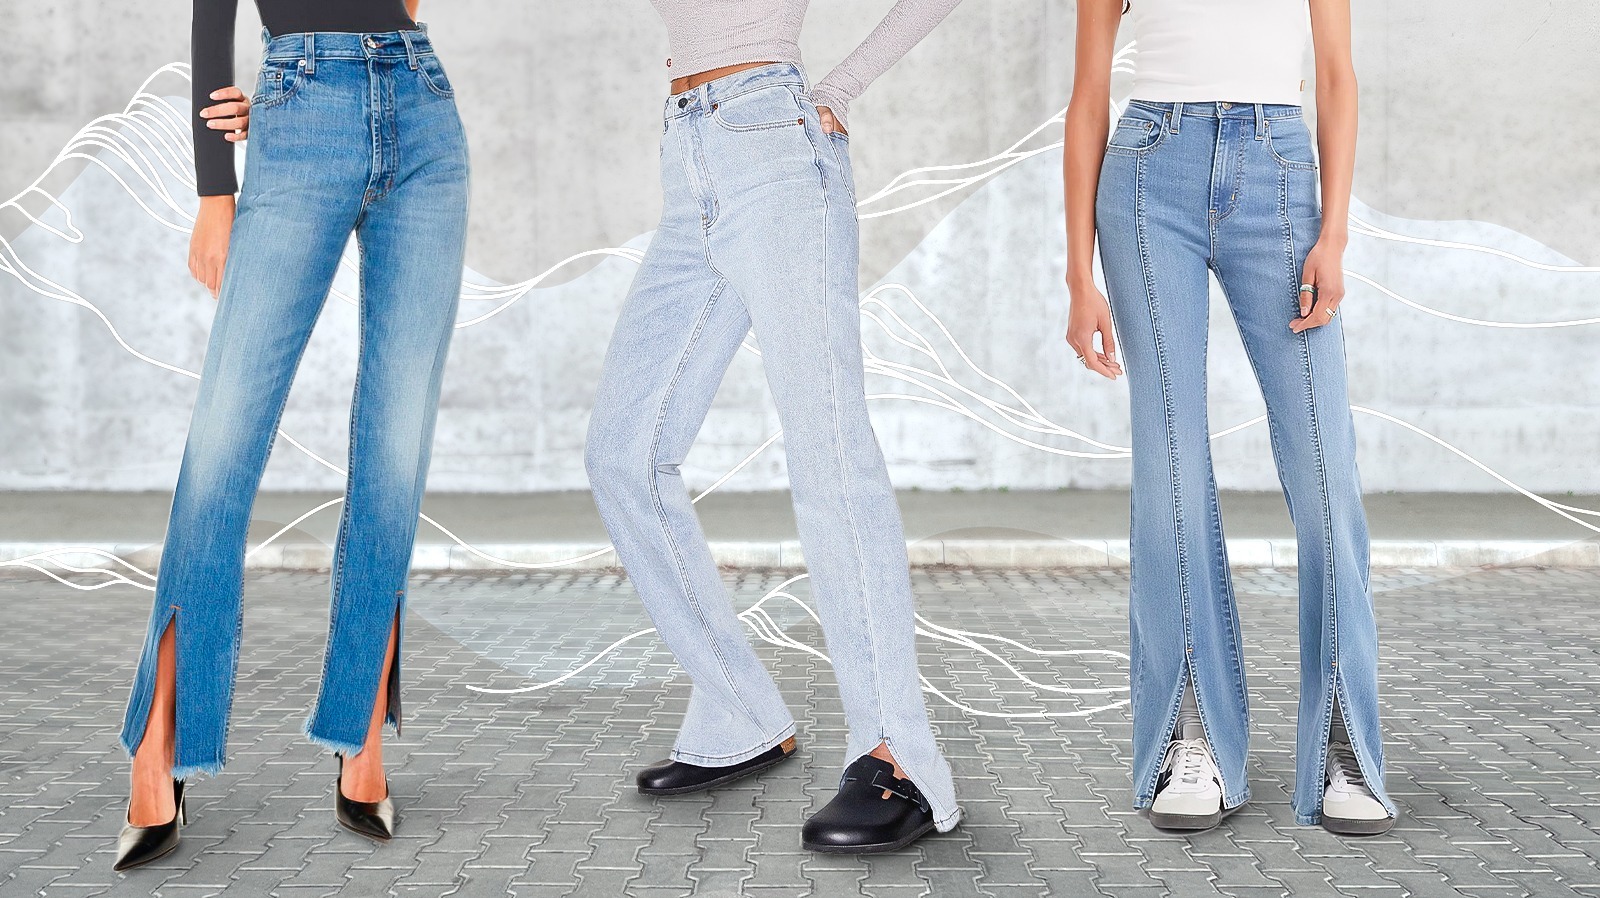 Pants trend: Why the split hem is the detail that changes